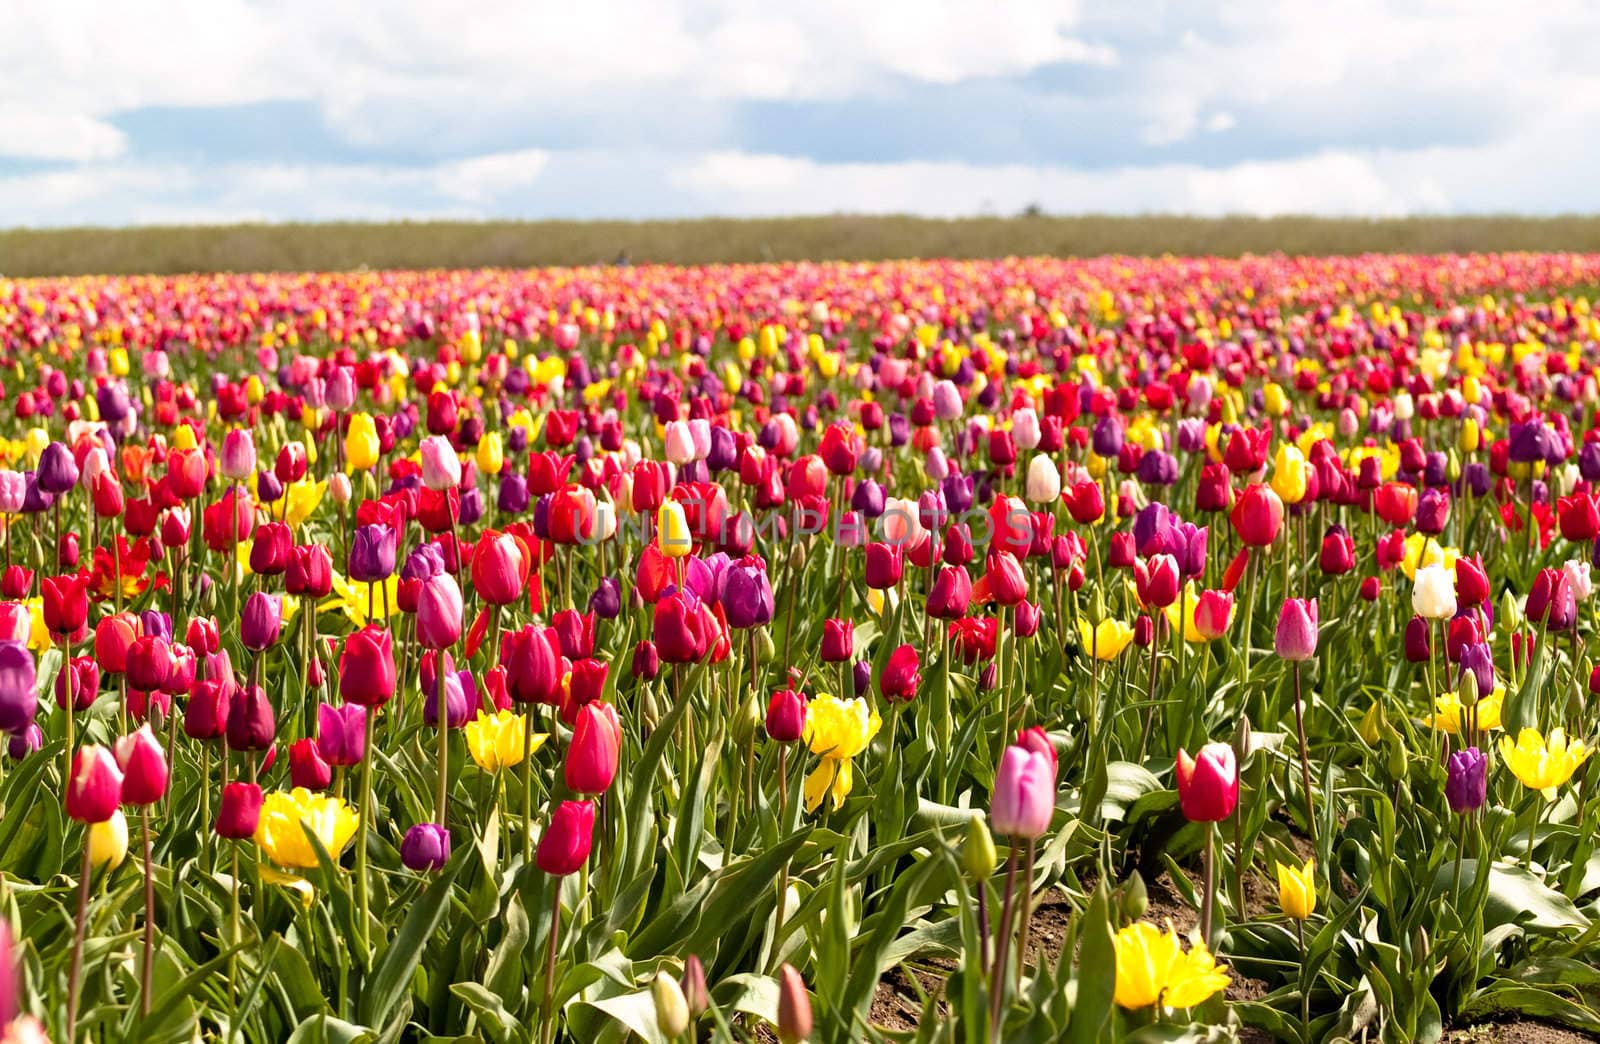 Tulips in a blooming field